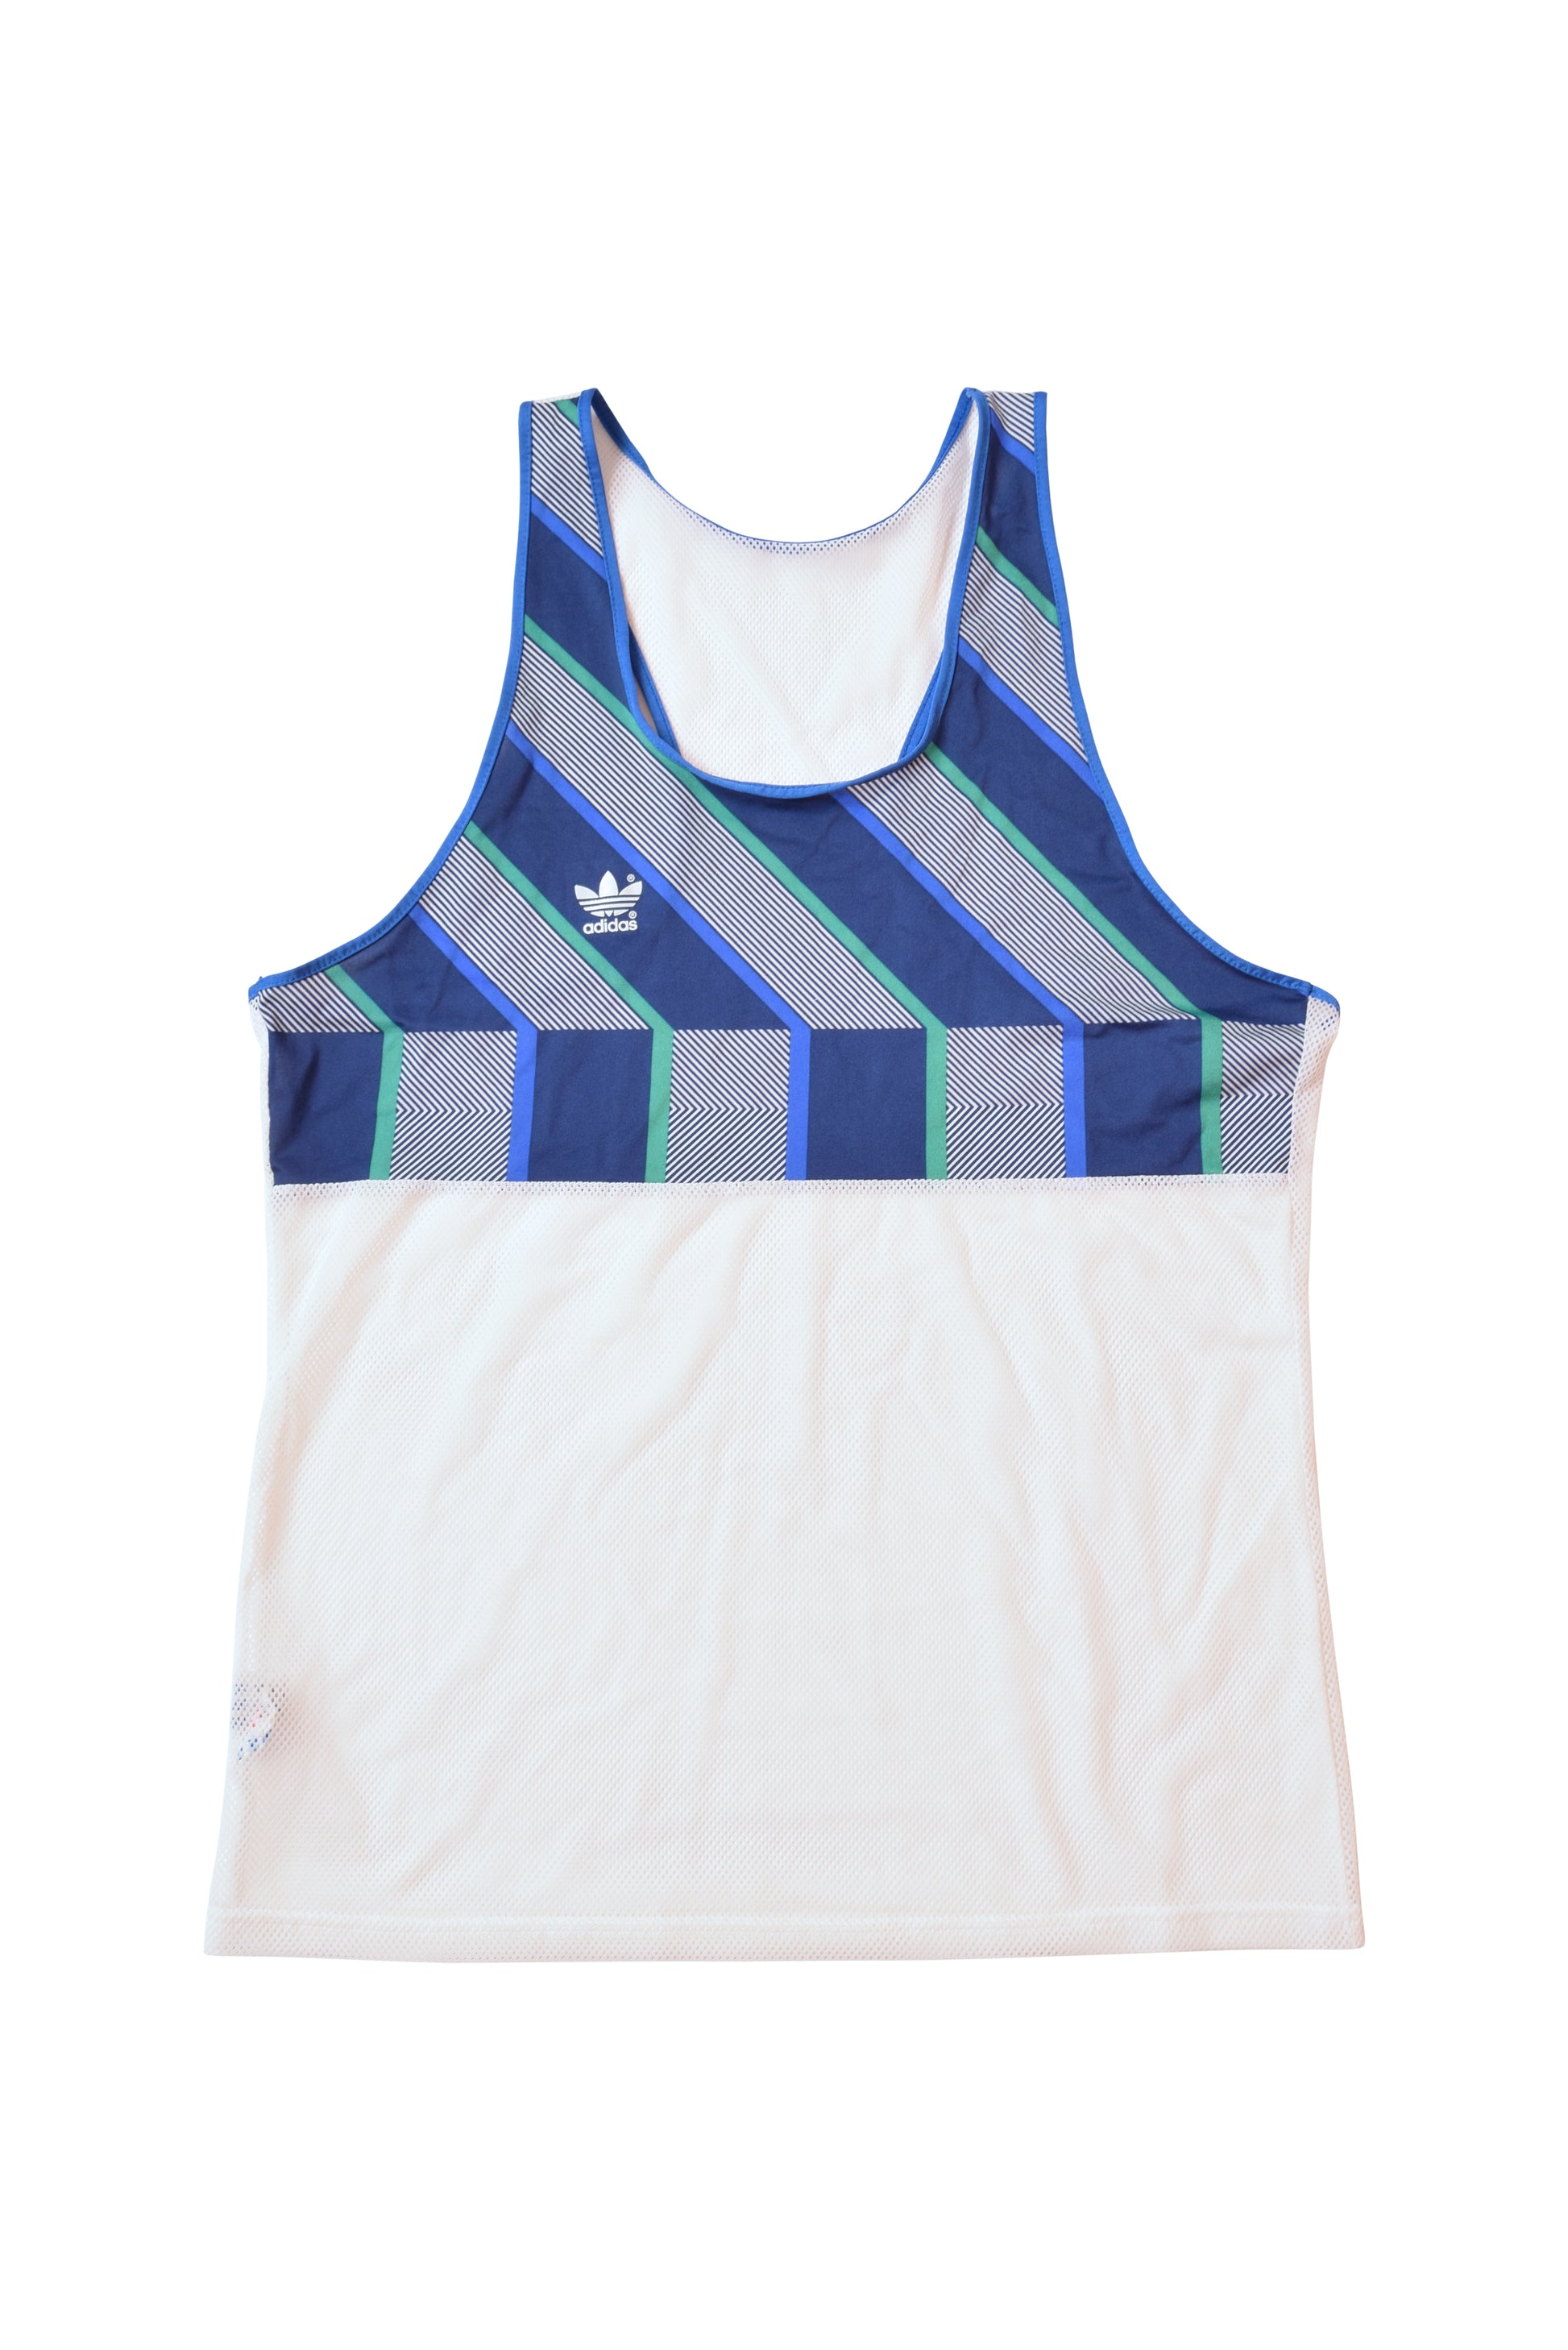 Vintage Adidas Tank Top 80's Made in West Germany  